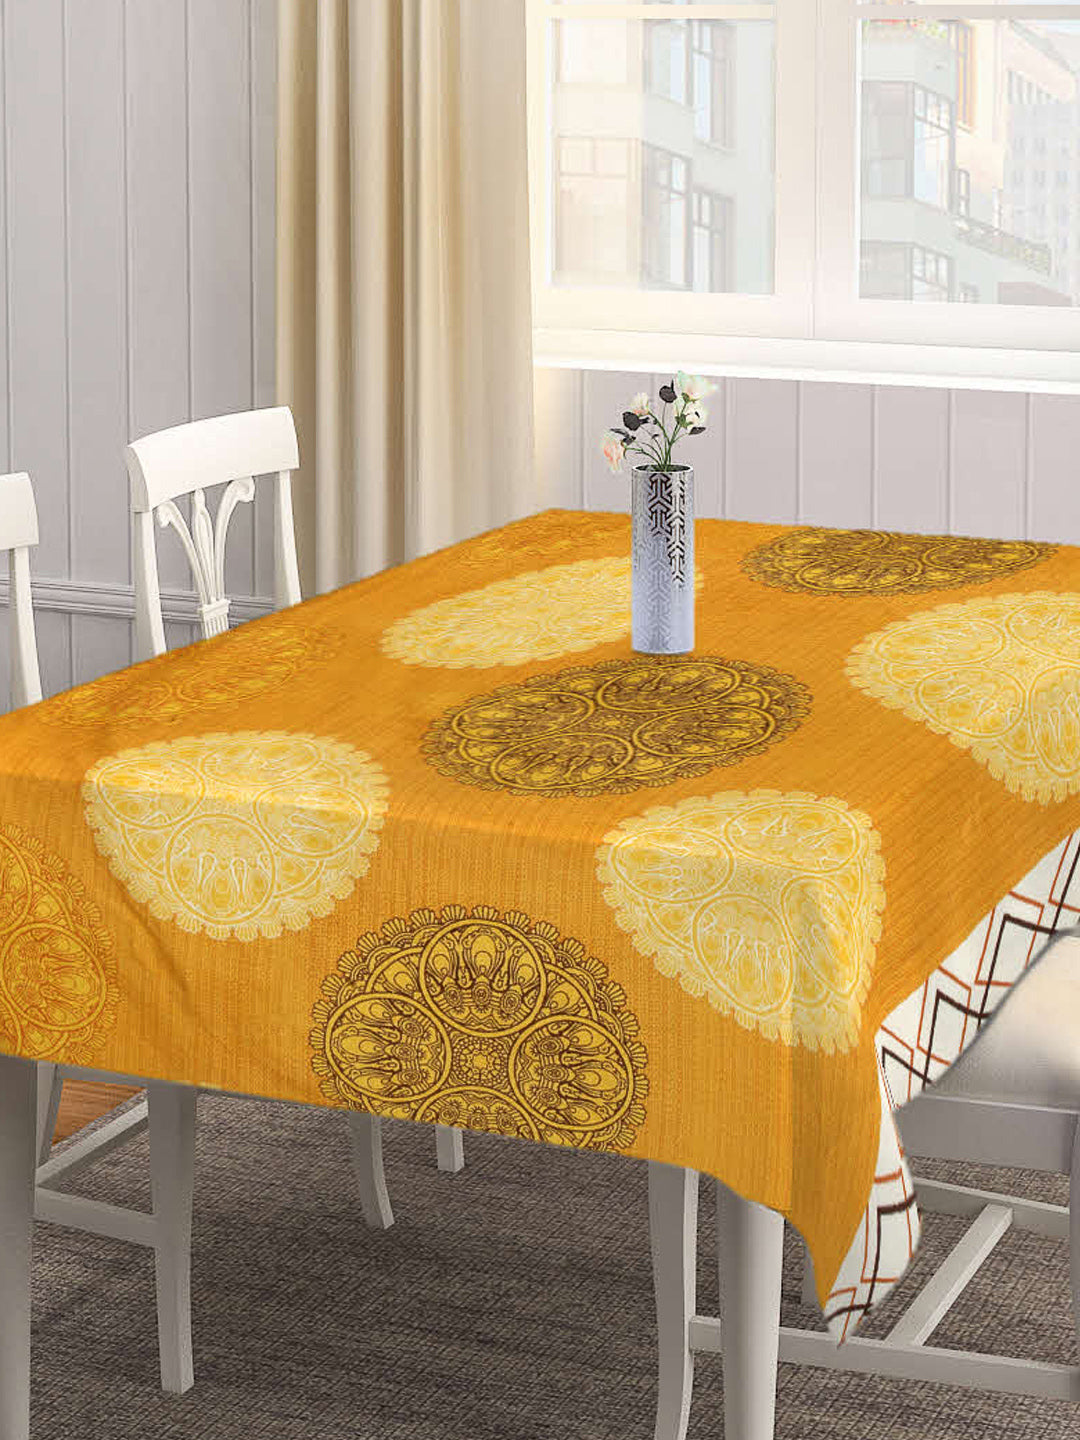 Arrabi Yellow Indian Cotton Blend 8 SEATER Table Cover (225 X 150 cm)